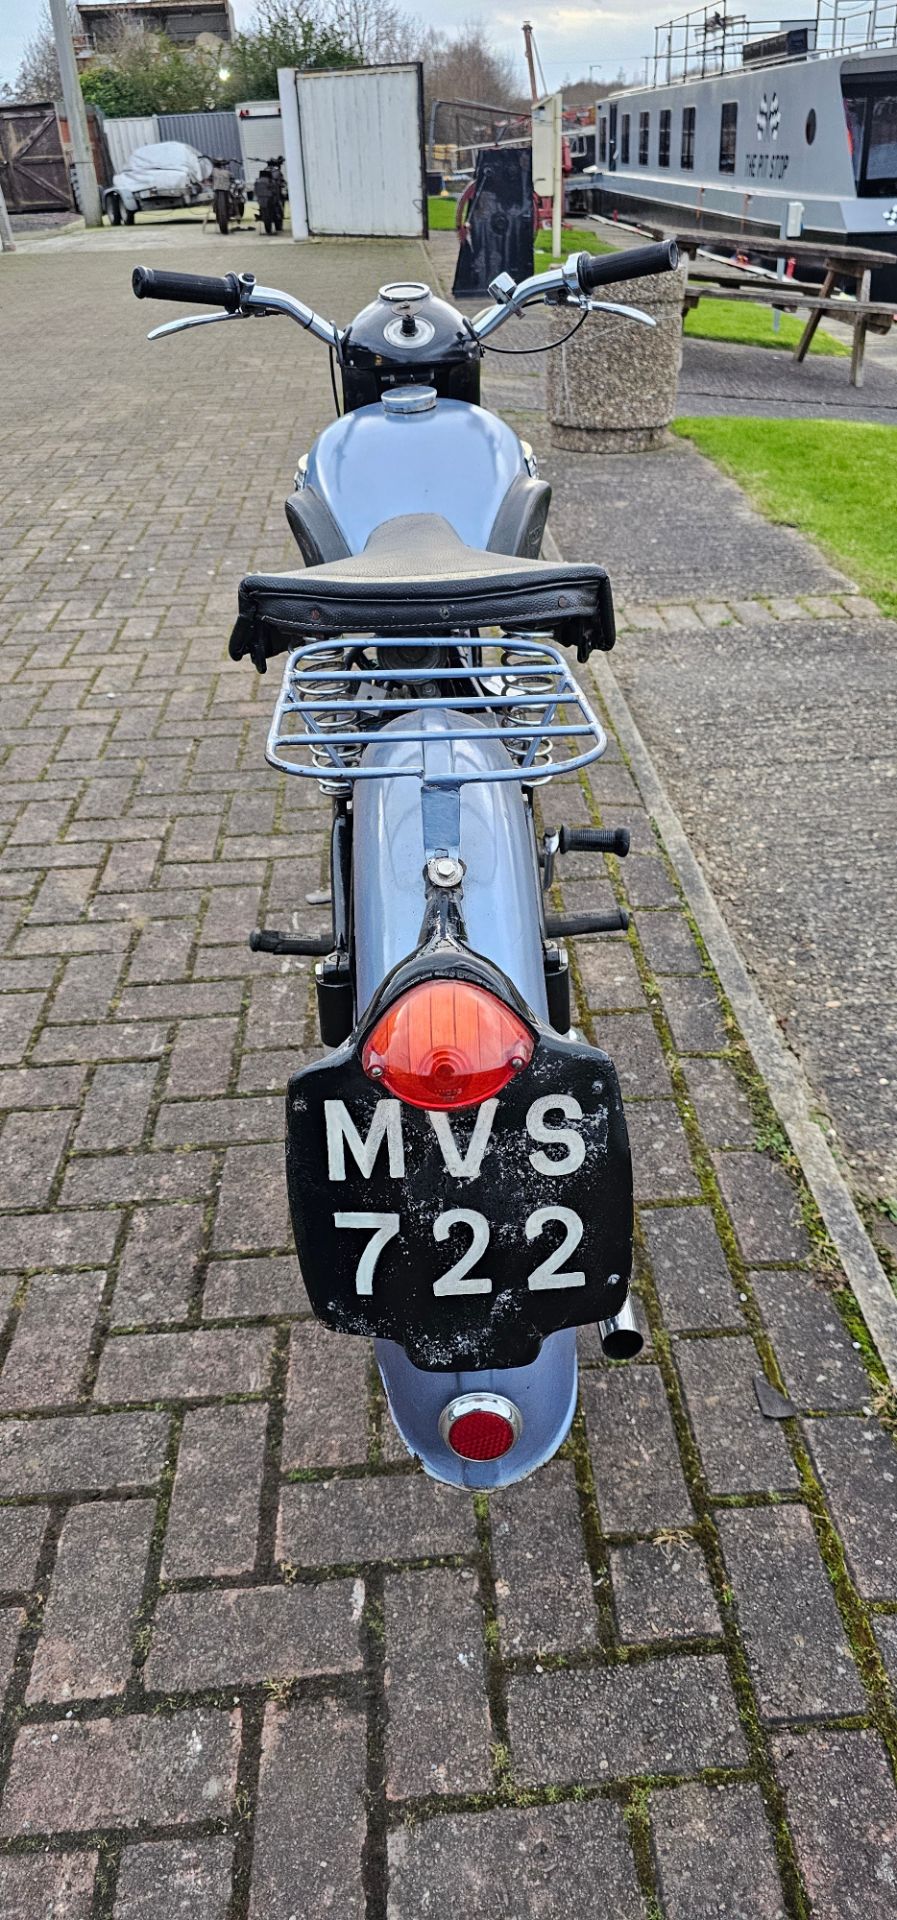 1956 Triumph Tiger Cub, 200cc. Registration number MVS 722 (non transferrable). Frame number T24516. - Image 3 of 3